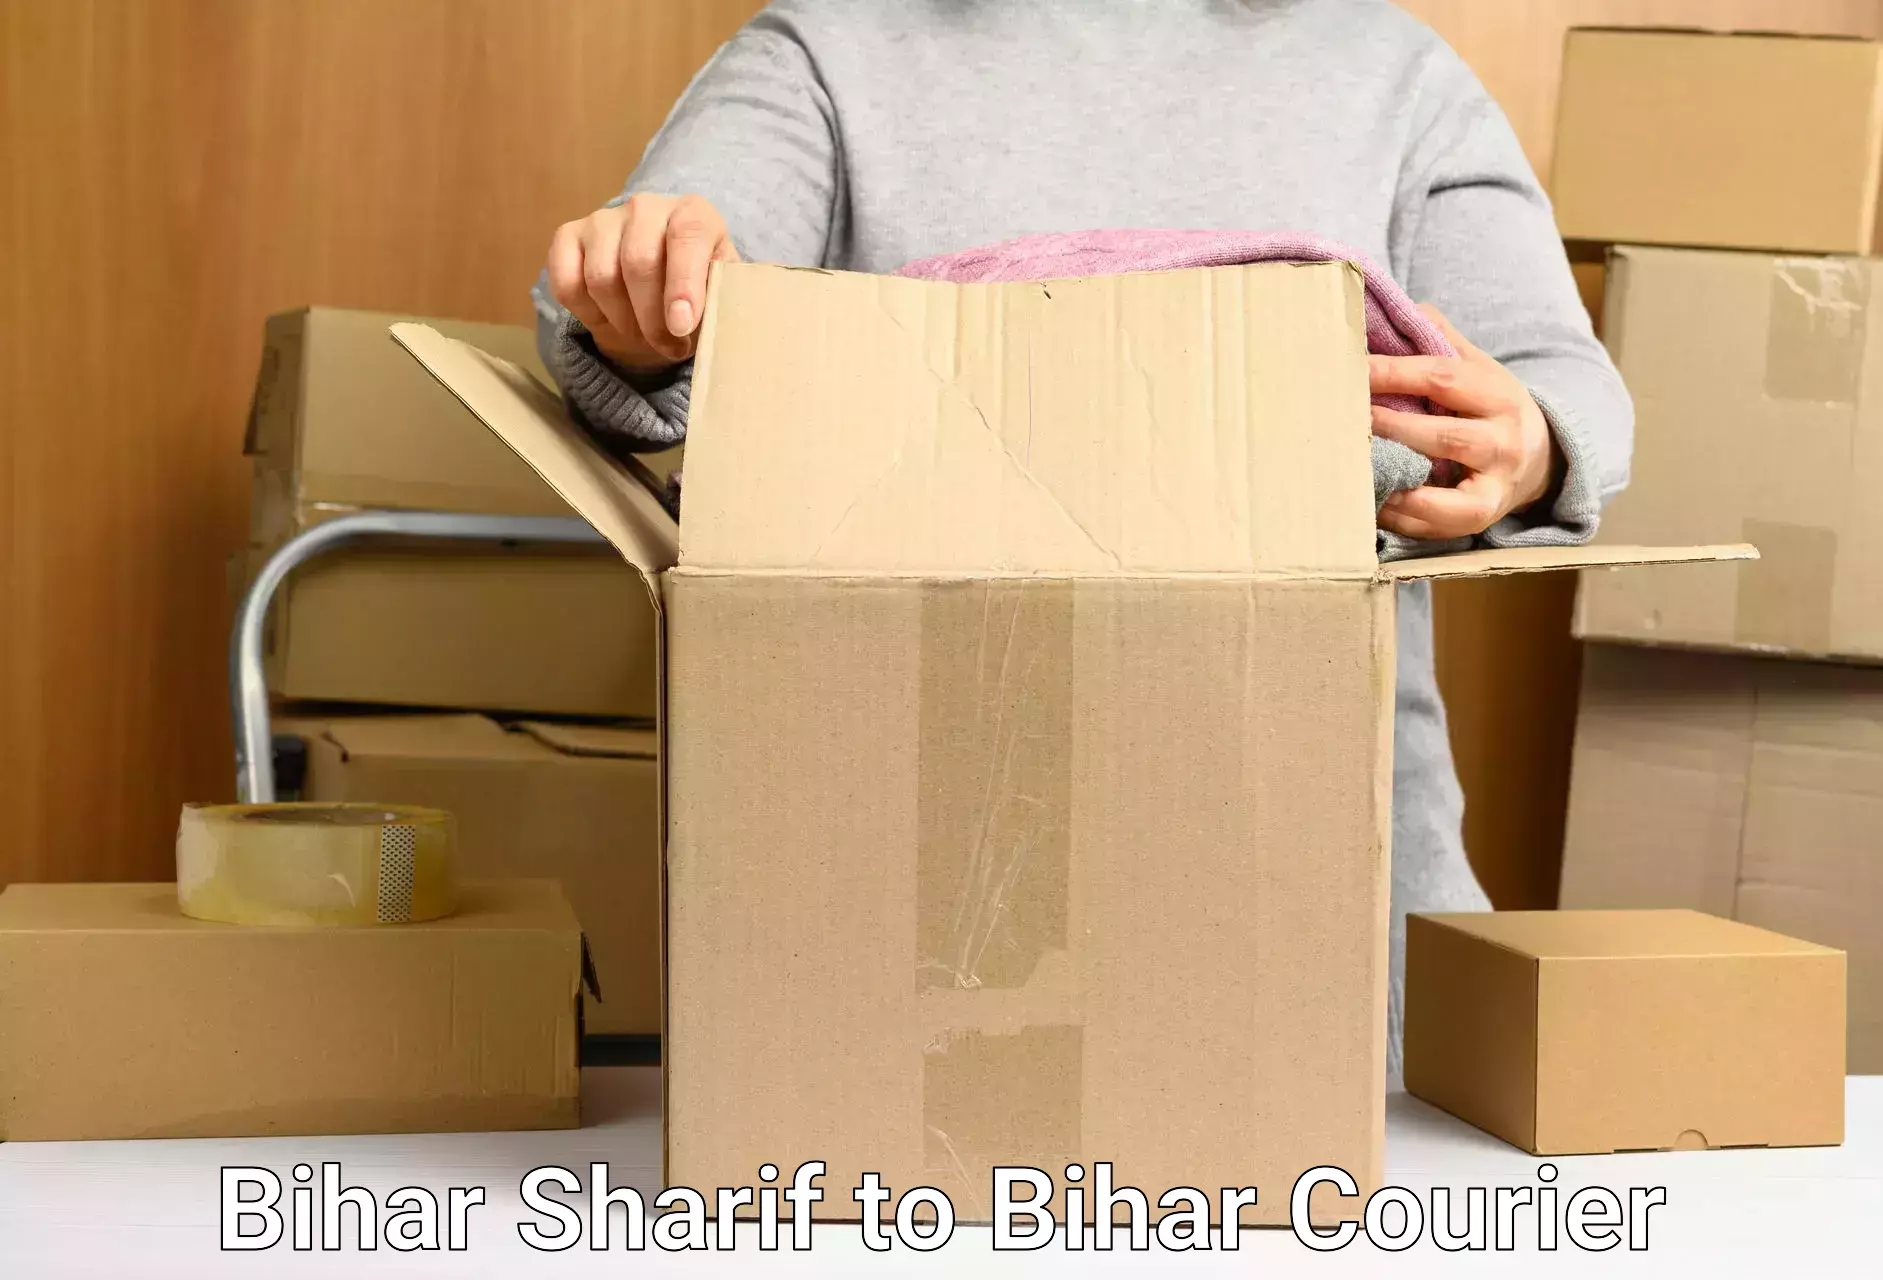 Courier service booking in Bihar Sharif to Fatwah